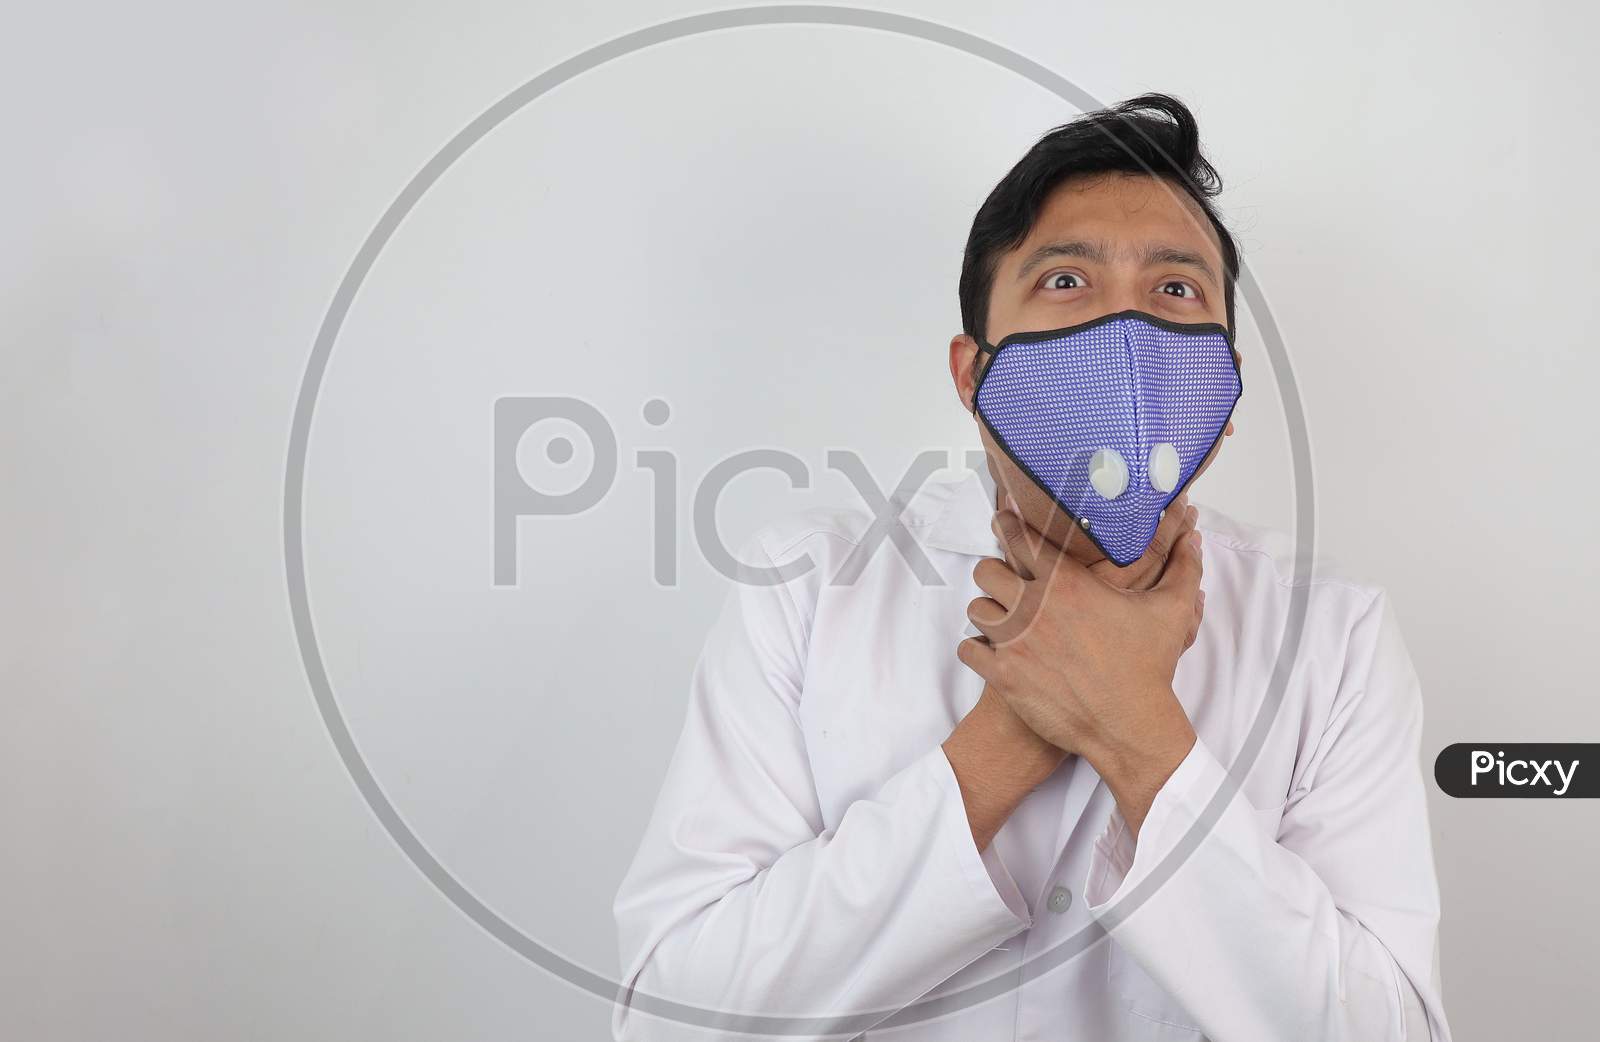 A Male Doctor In Mask And White Coat Holding His Neck With Both Hands With Choking Expression Isolated In White Grey Background With Space For Text